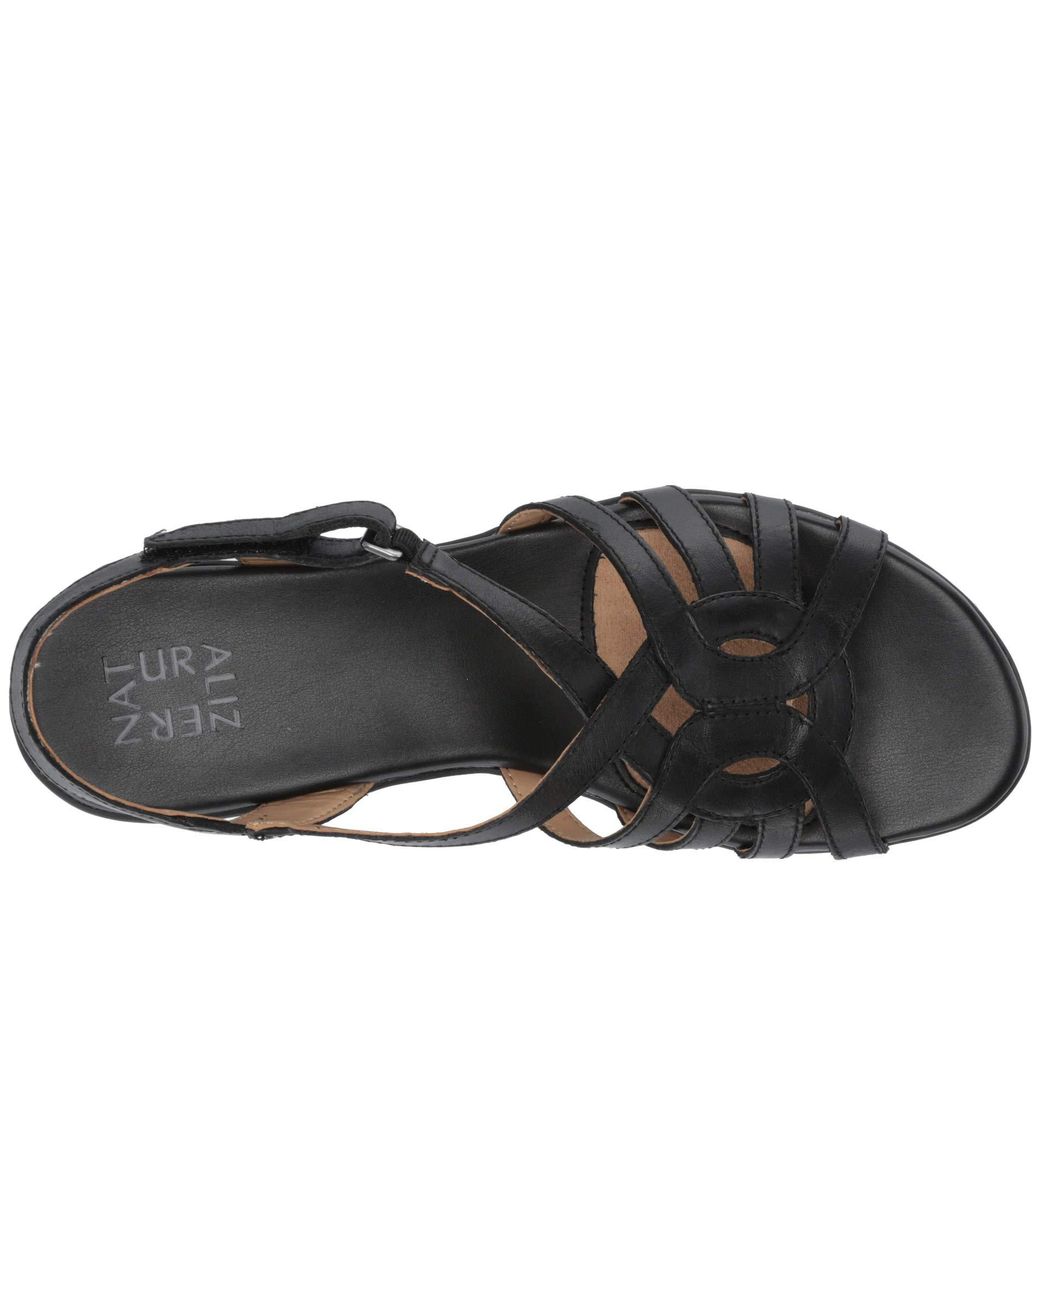 Buy Naturalizer by Bata Women's Black Back Strap Sandals for Women at Best  Price @ Tata CLiQ